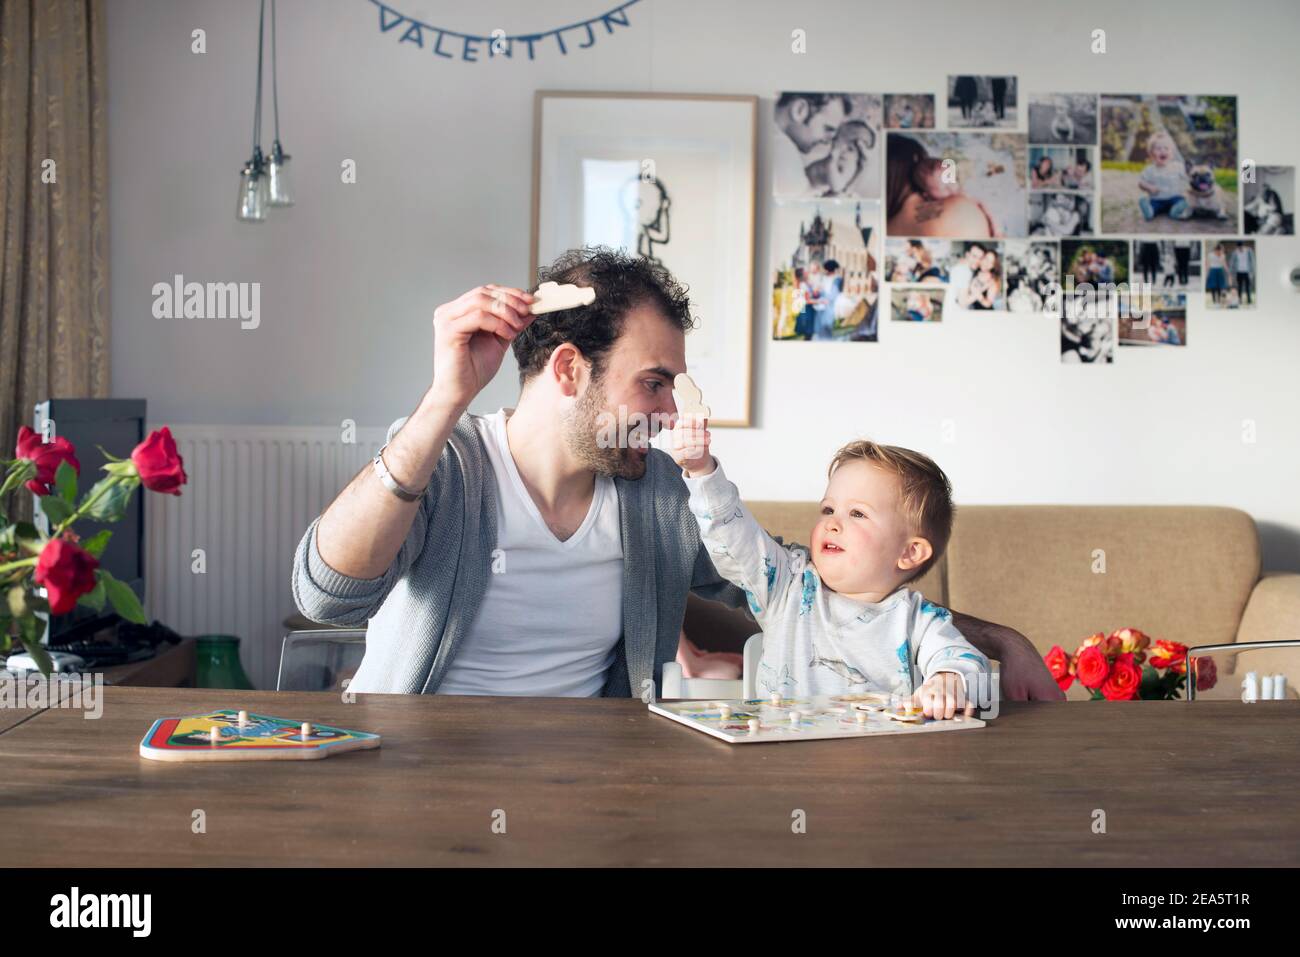 DAILY LIFE EVERYDAY FAMILY TIME Stock Photo